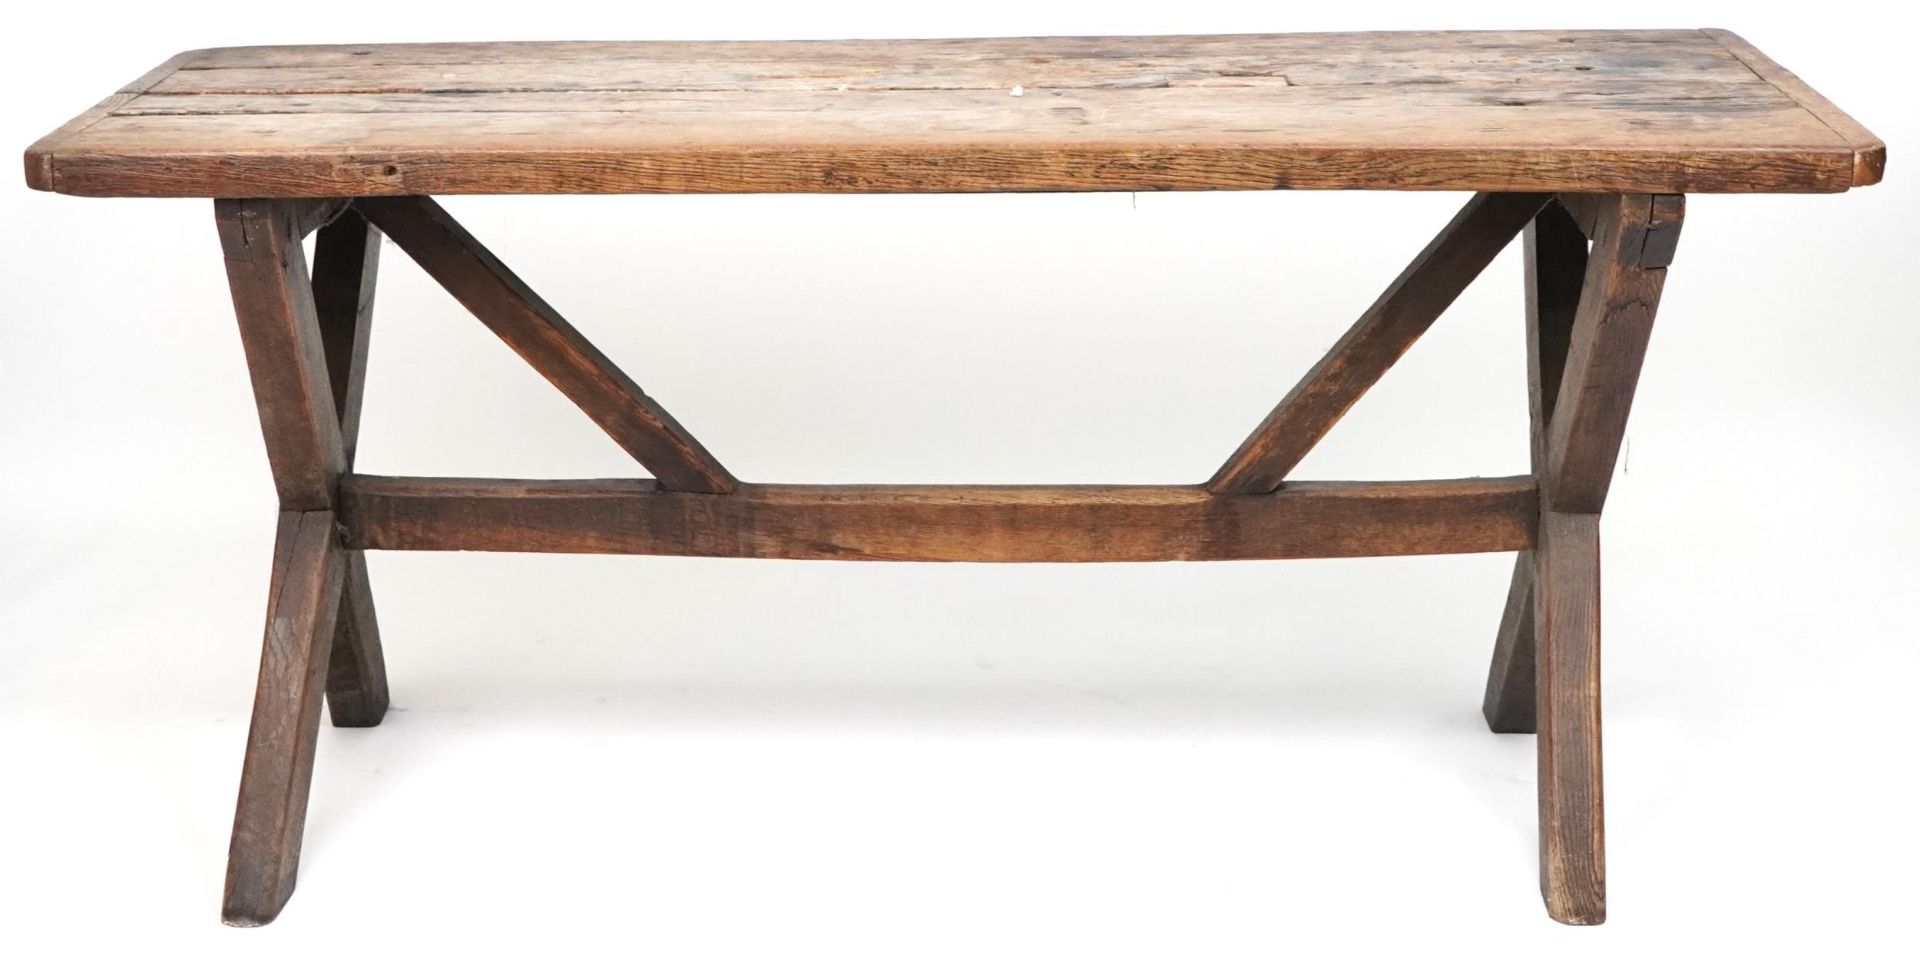 Industrial hardwood dining table with X stretcher, 71cm H x 157cm W x 60cm D - Image 2 of 4